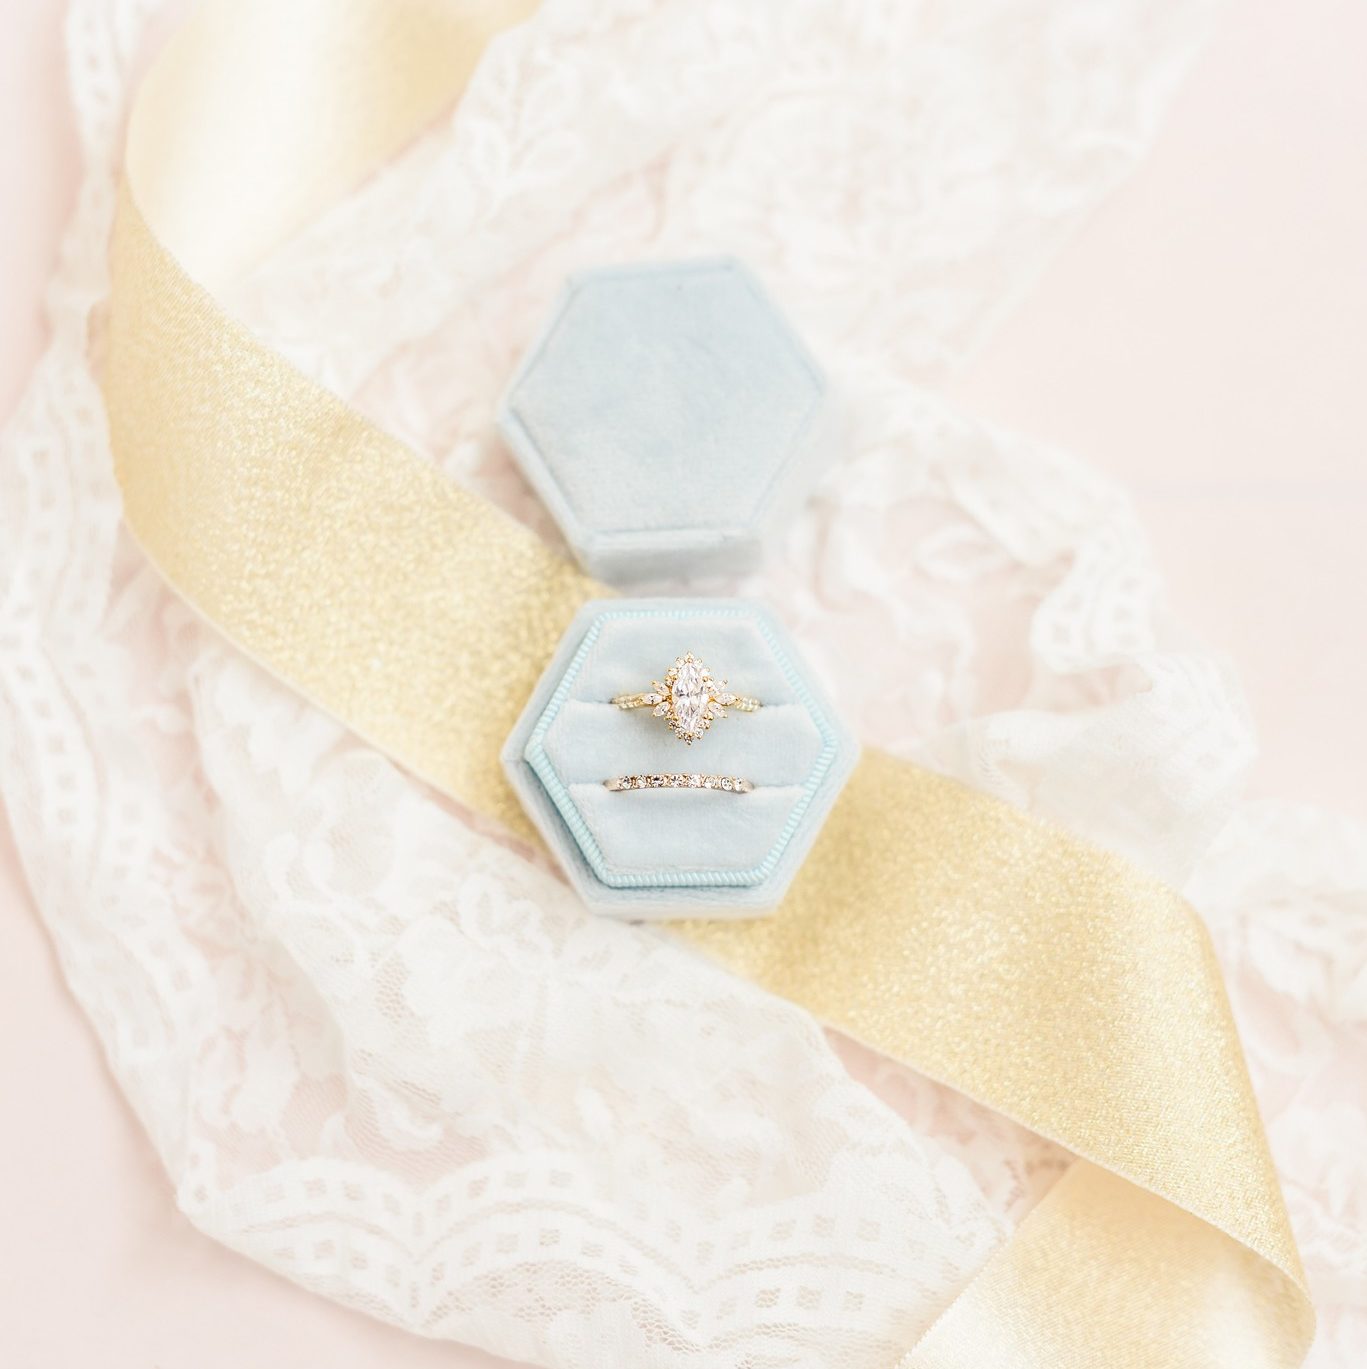 An engagement ring in an open top ring box with ribbons behind it.